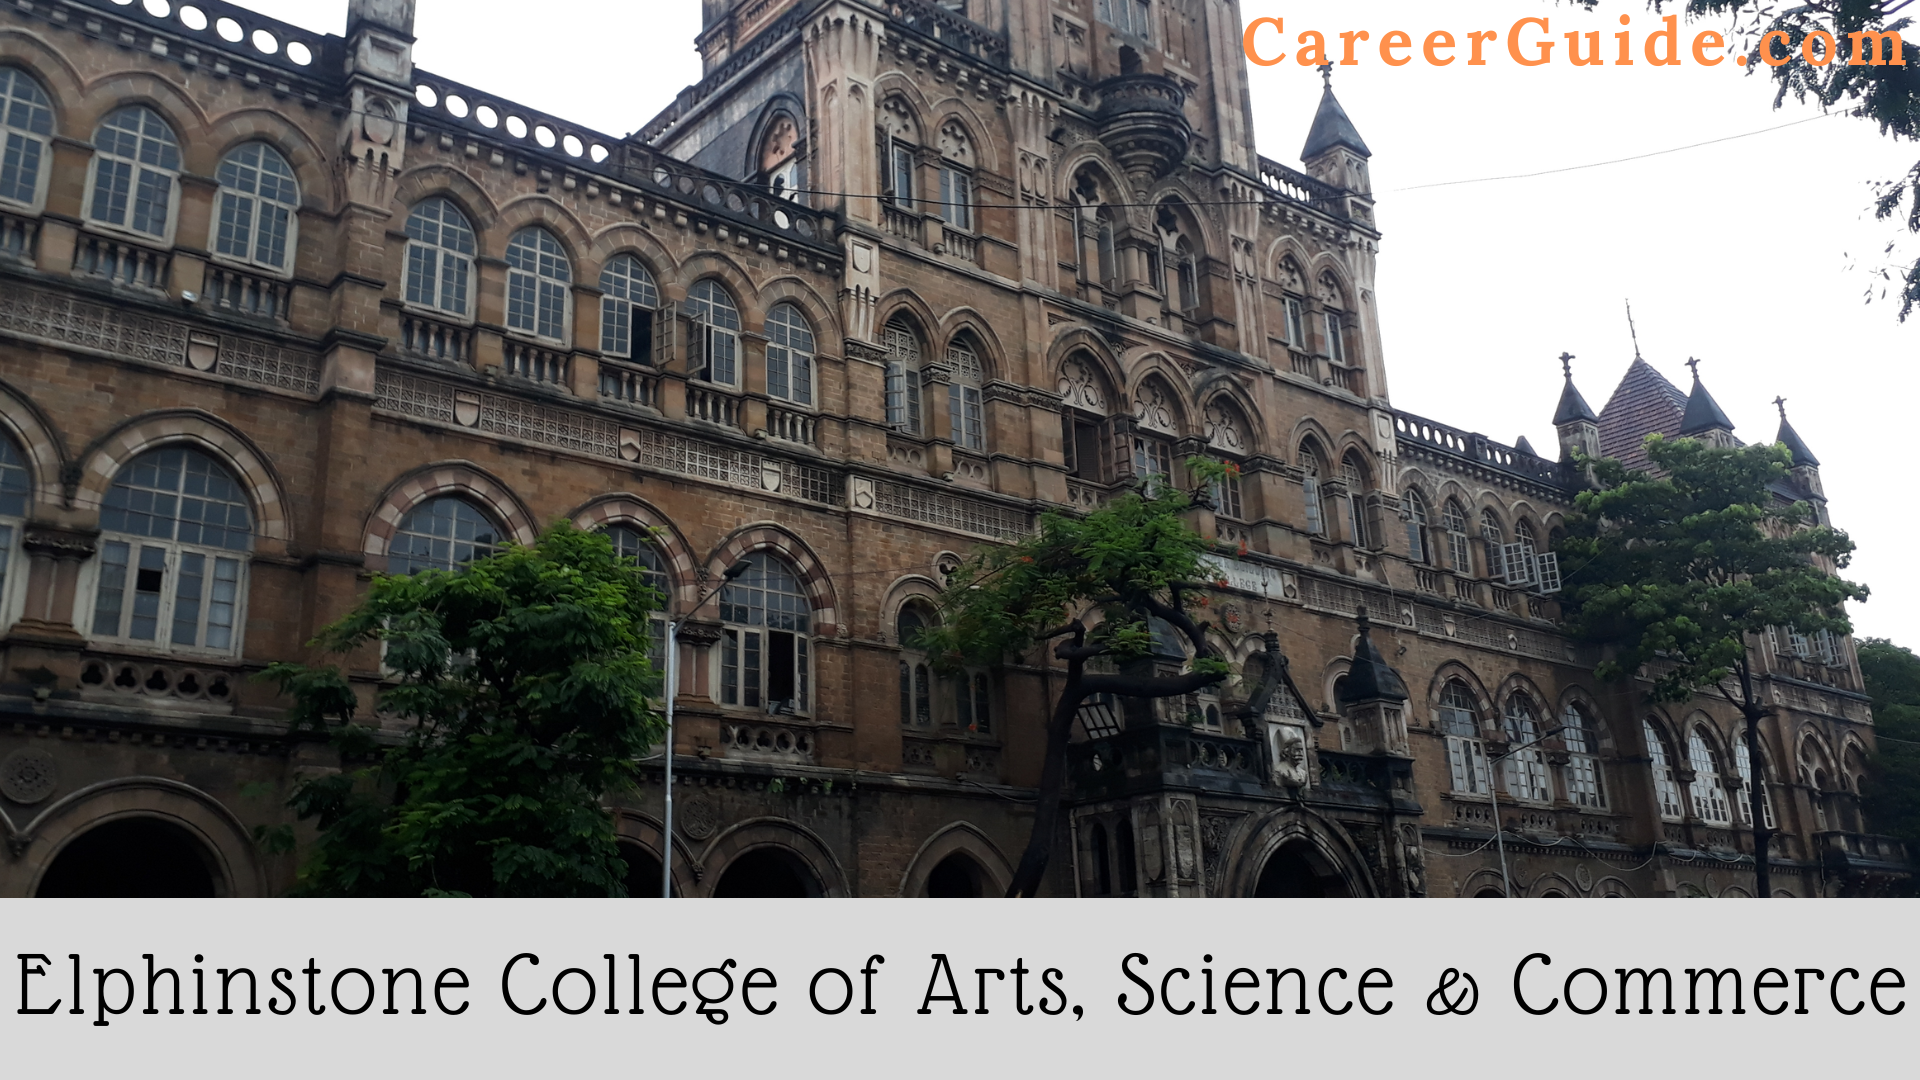 Elphinstone college of Arts, science & Commerce